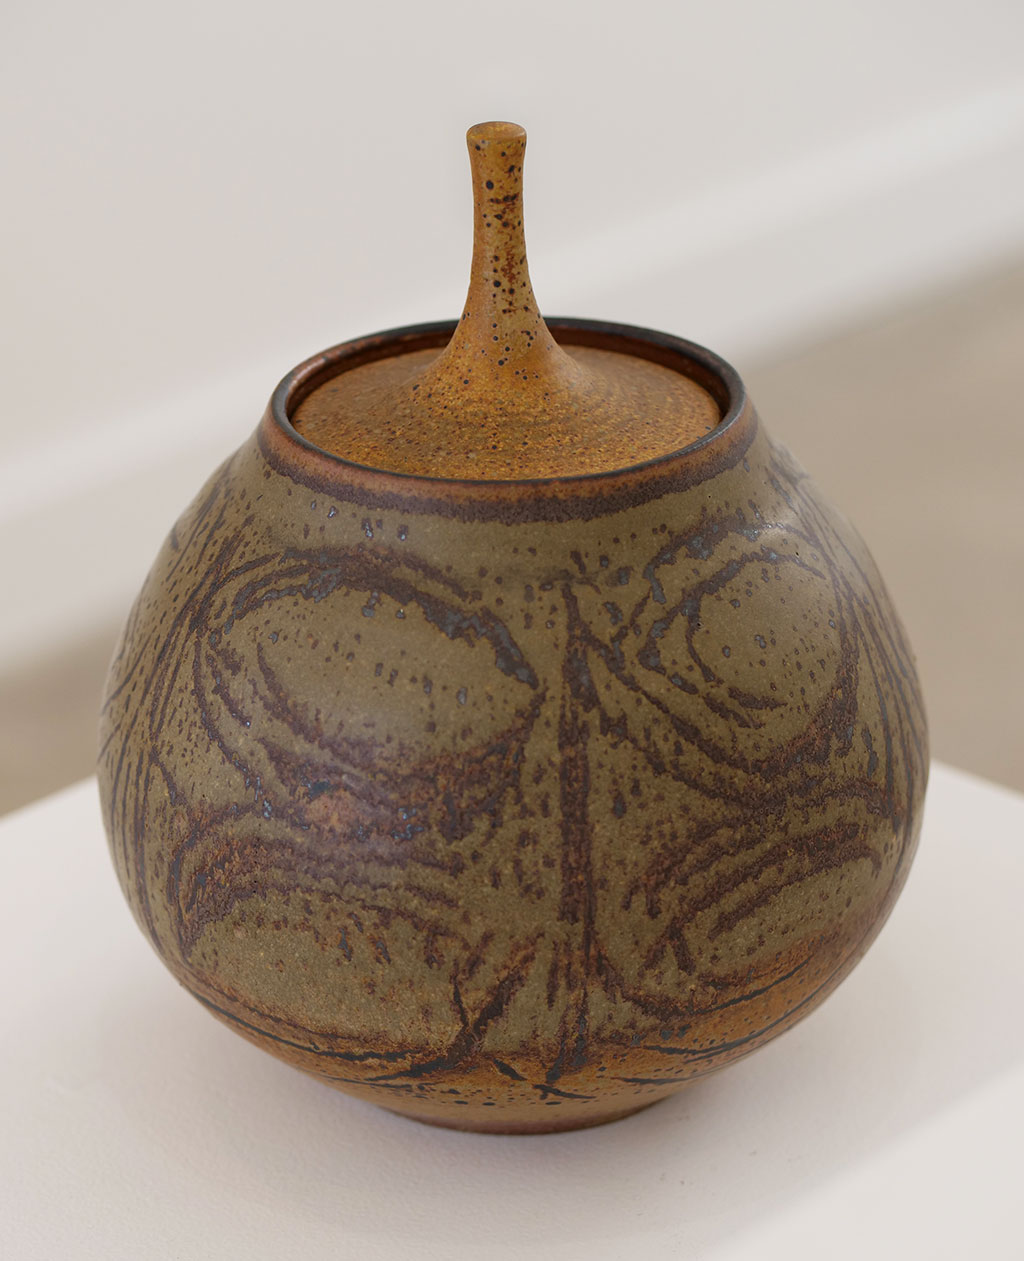 Tom McMillin, Lidded Vessel, 1960, California Visionaries: Seminal Studio Craft, Featuring Works from the Forrest L. Merrill Collection